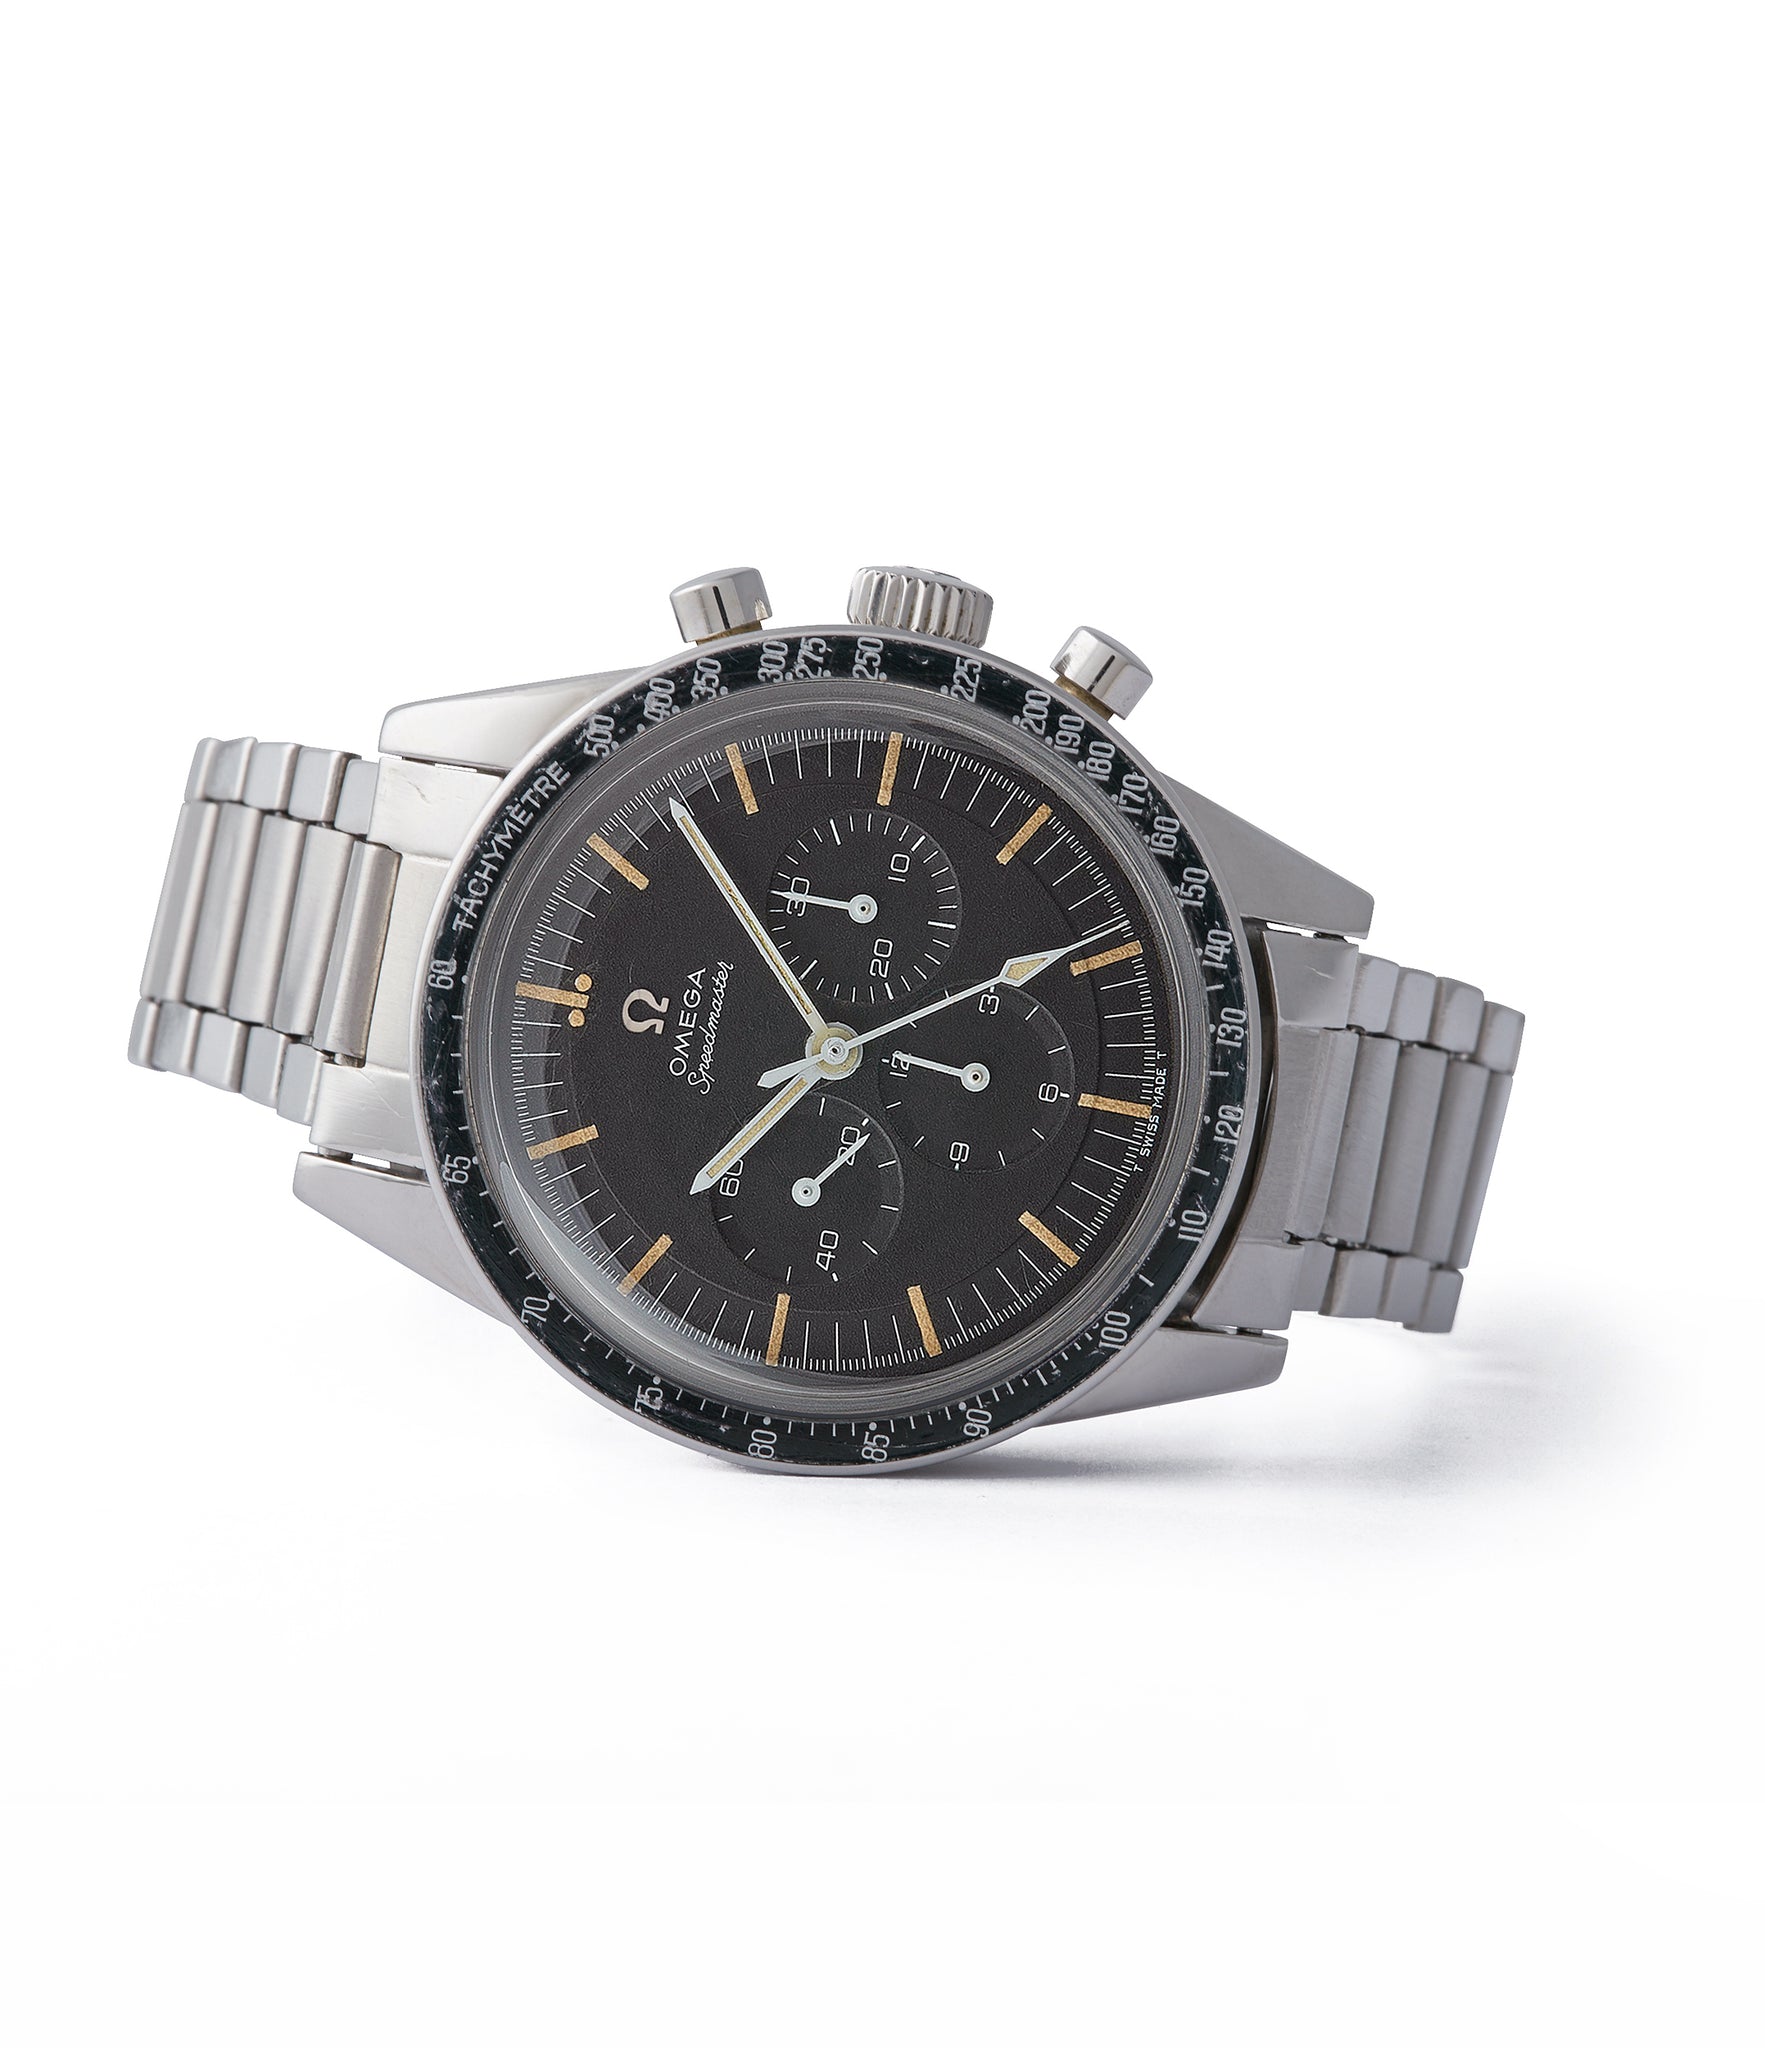 Omega vintage Speedmaster pre-professional Ed White 105.003-65 steel chronograph sports watch online at A Collected Man London